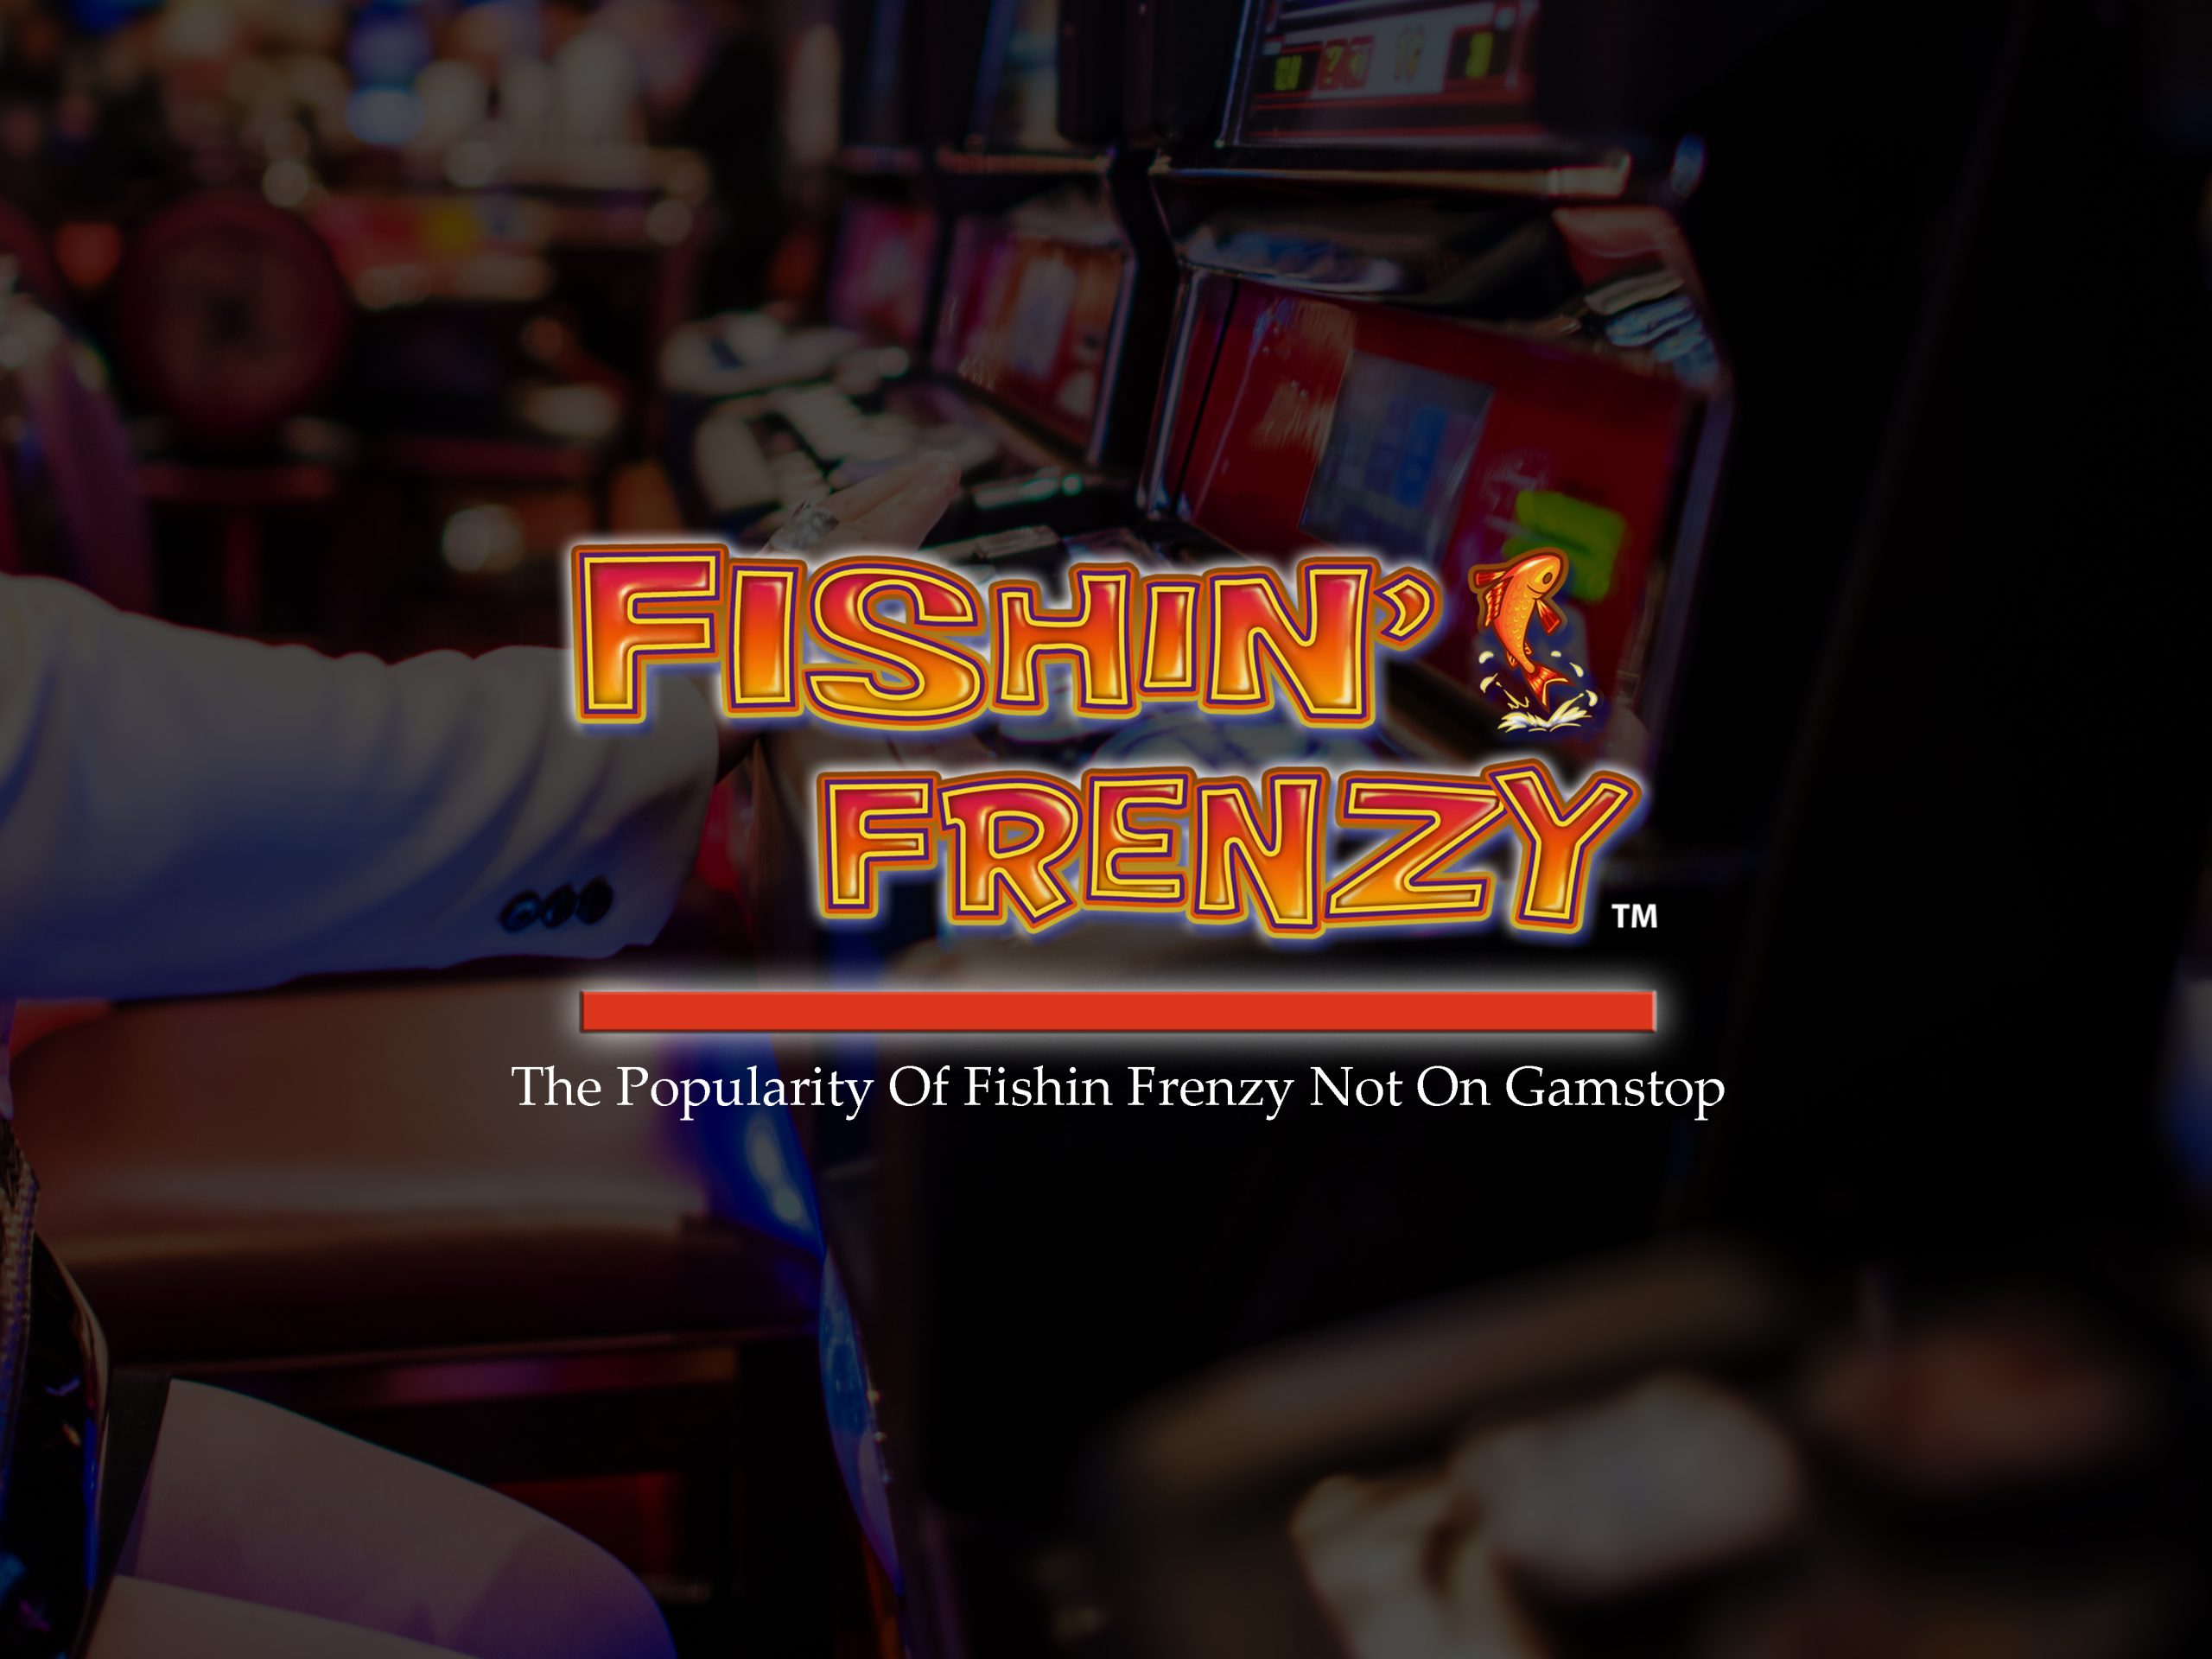 The Popularity Of Fishin Frenzy Not On Gamstop